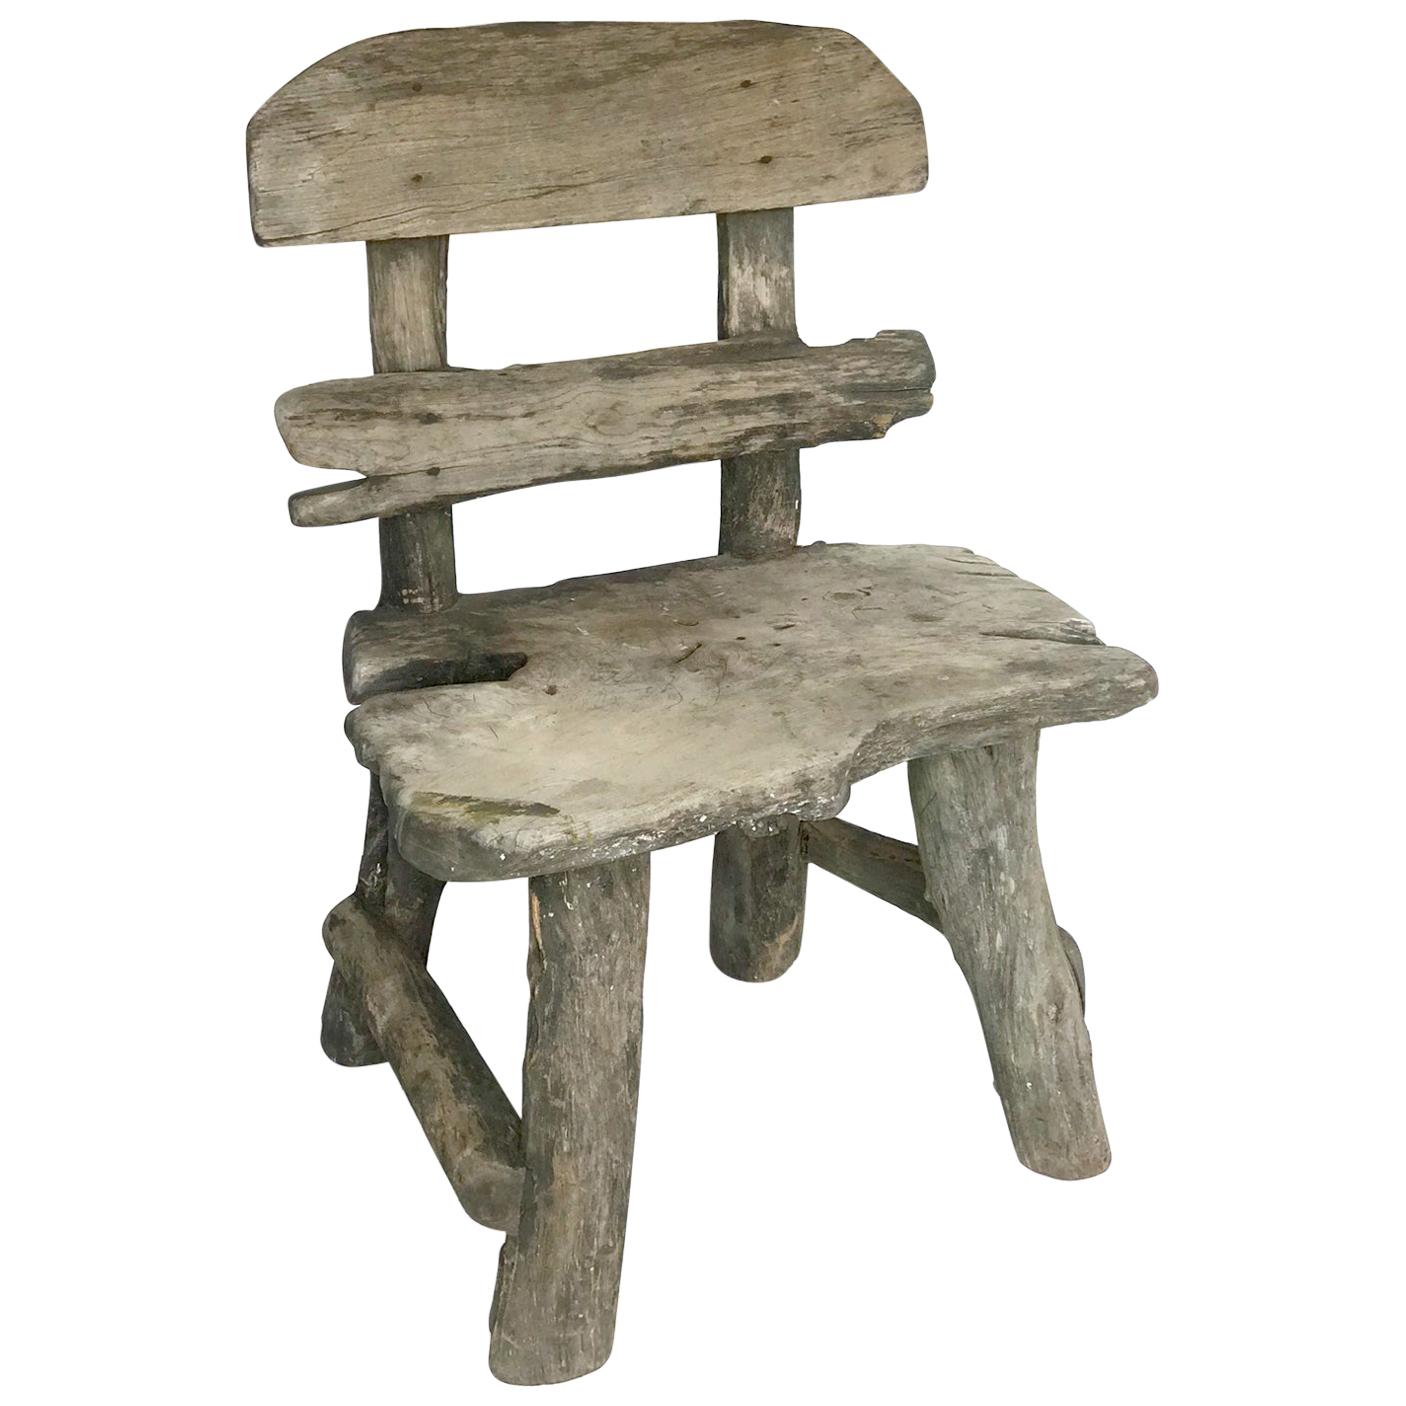 Rustic Weathered Teak Chair For Sale